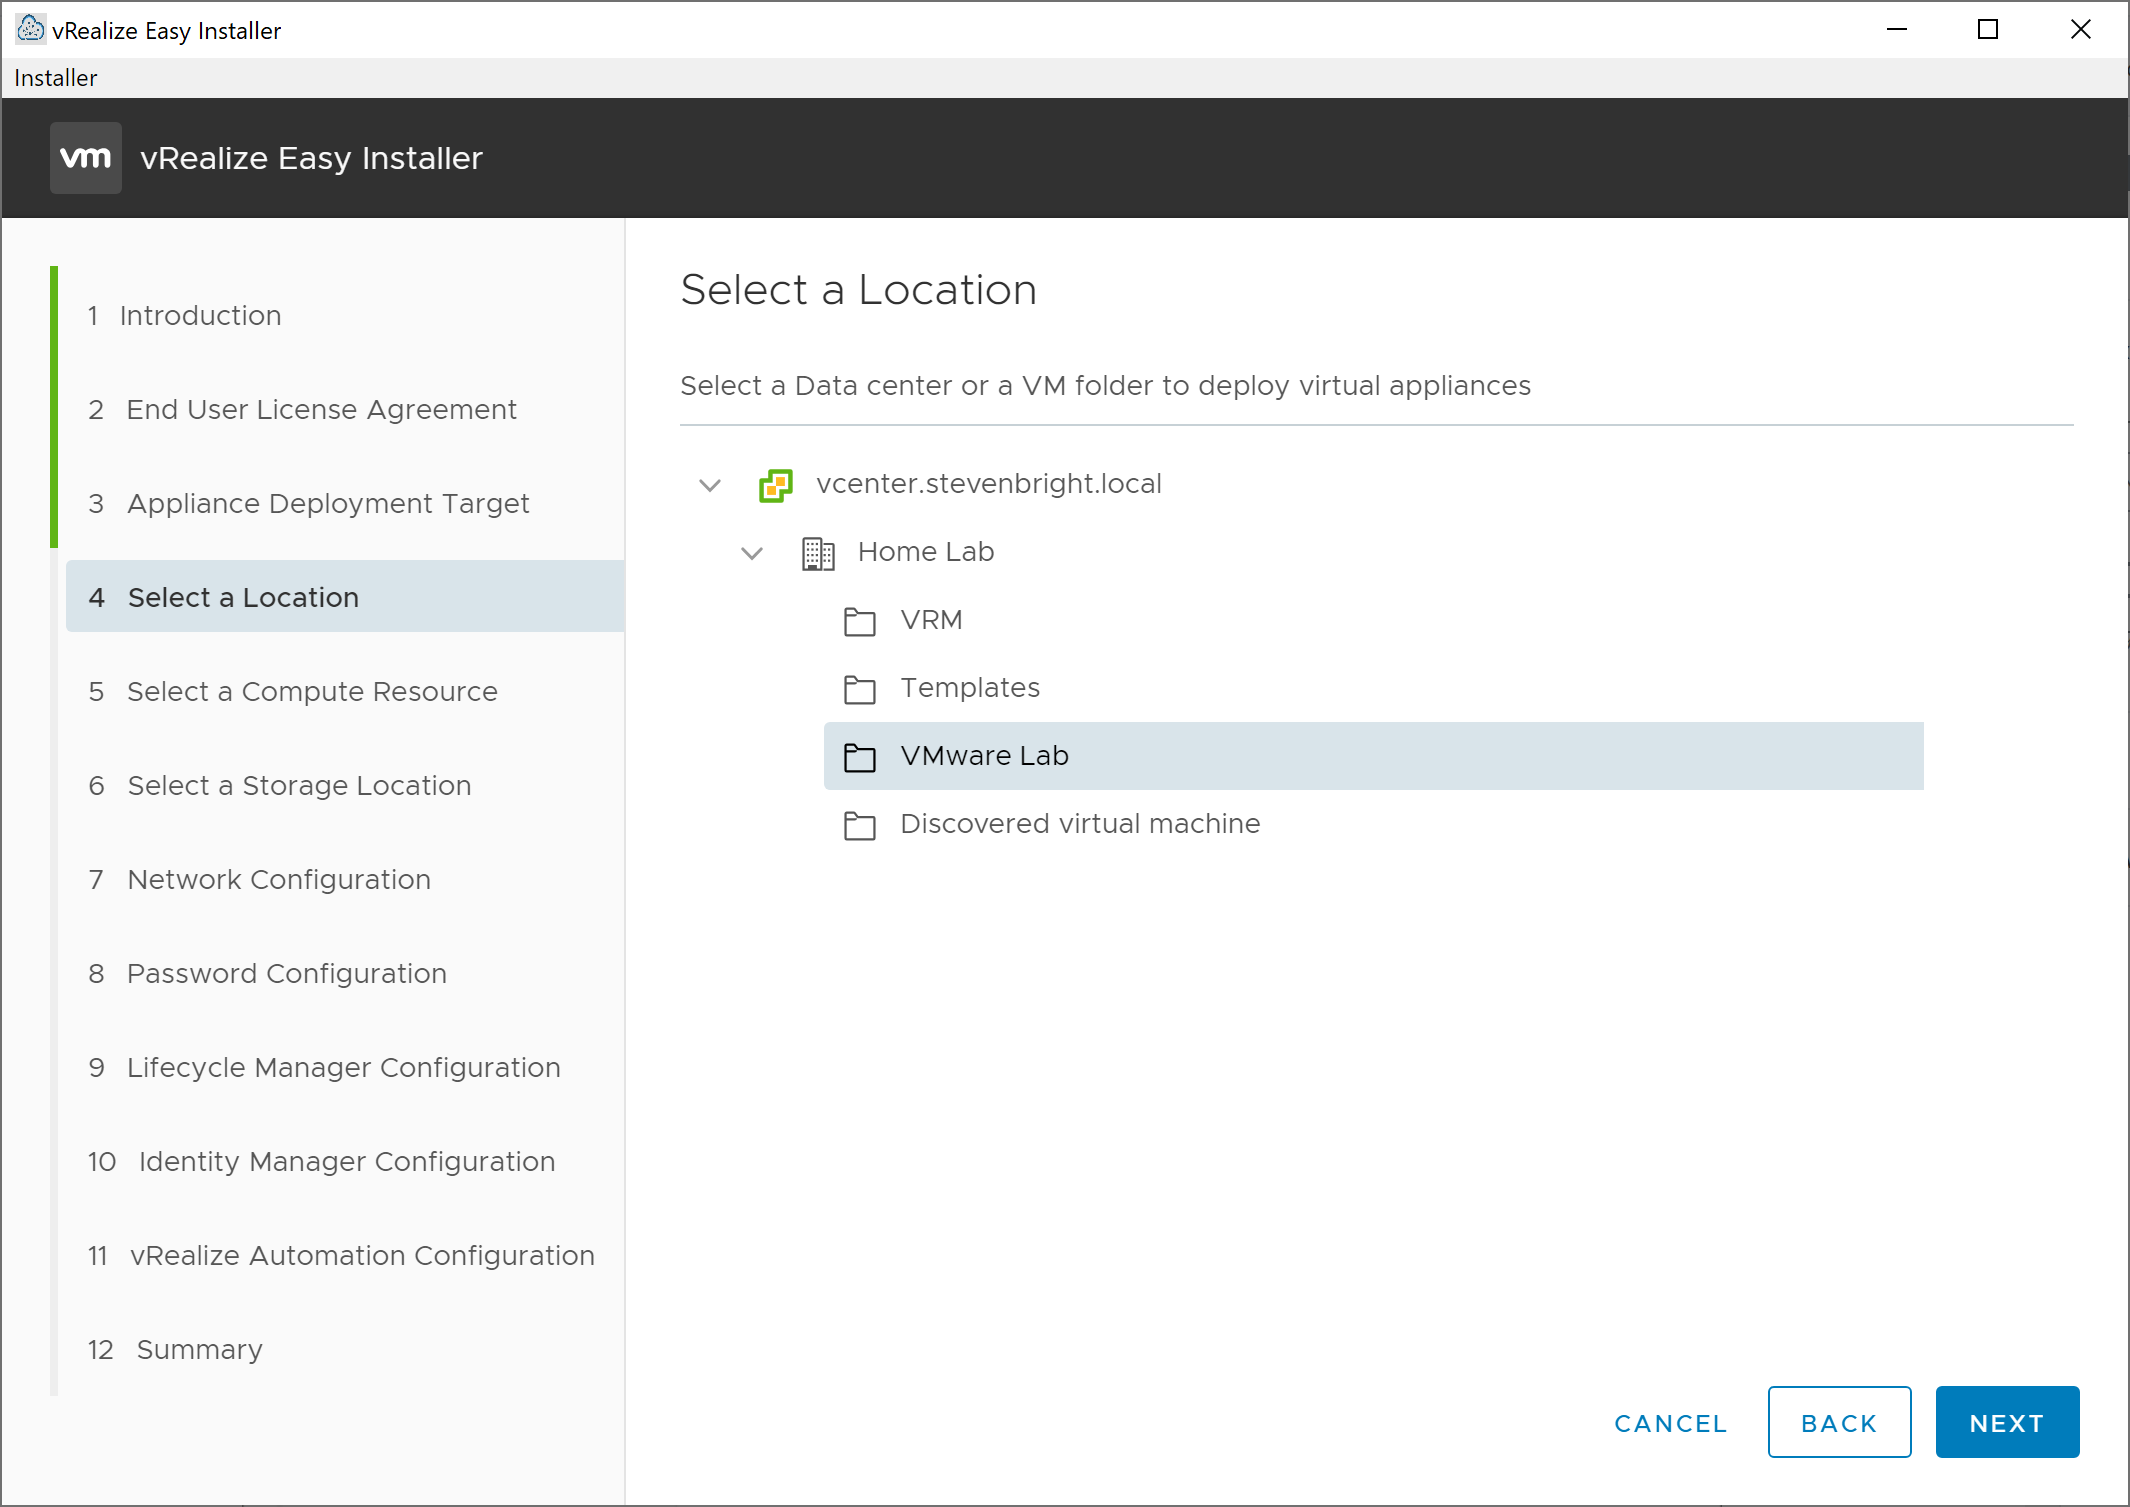 vRealize Easy Installer - New Install - Select a Location